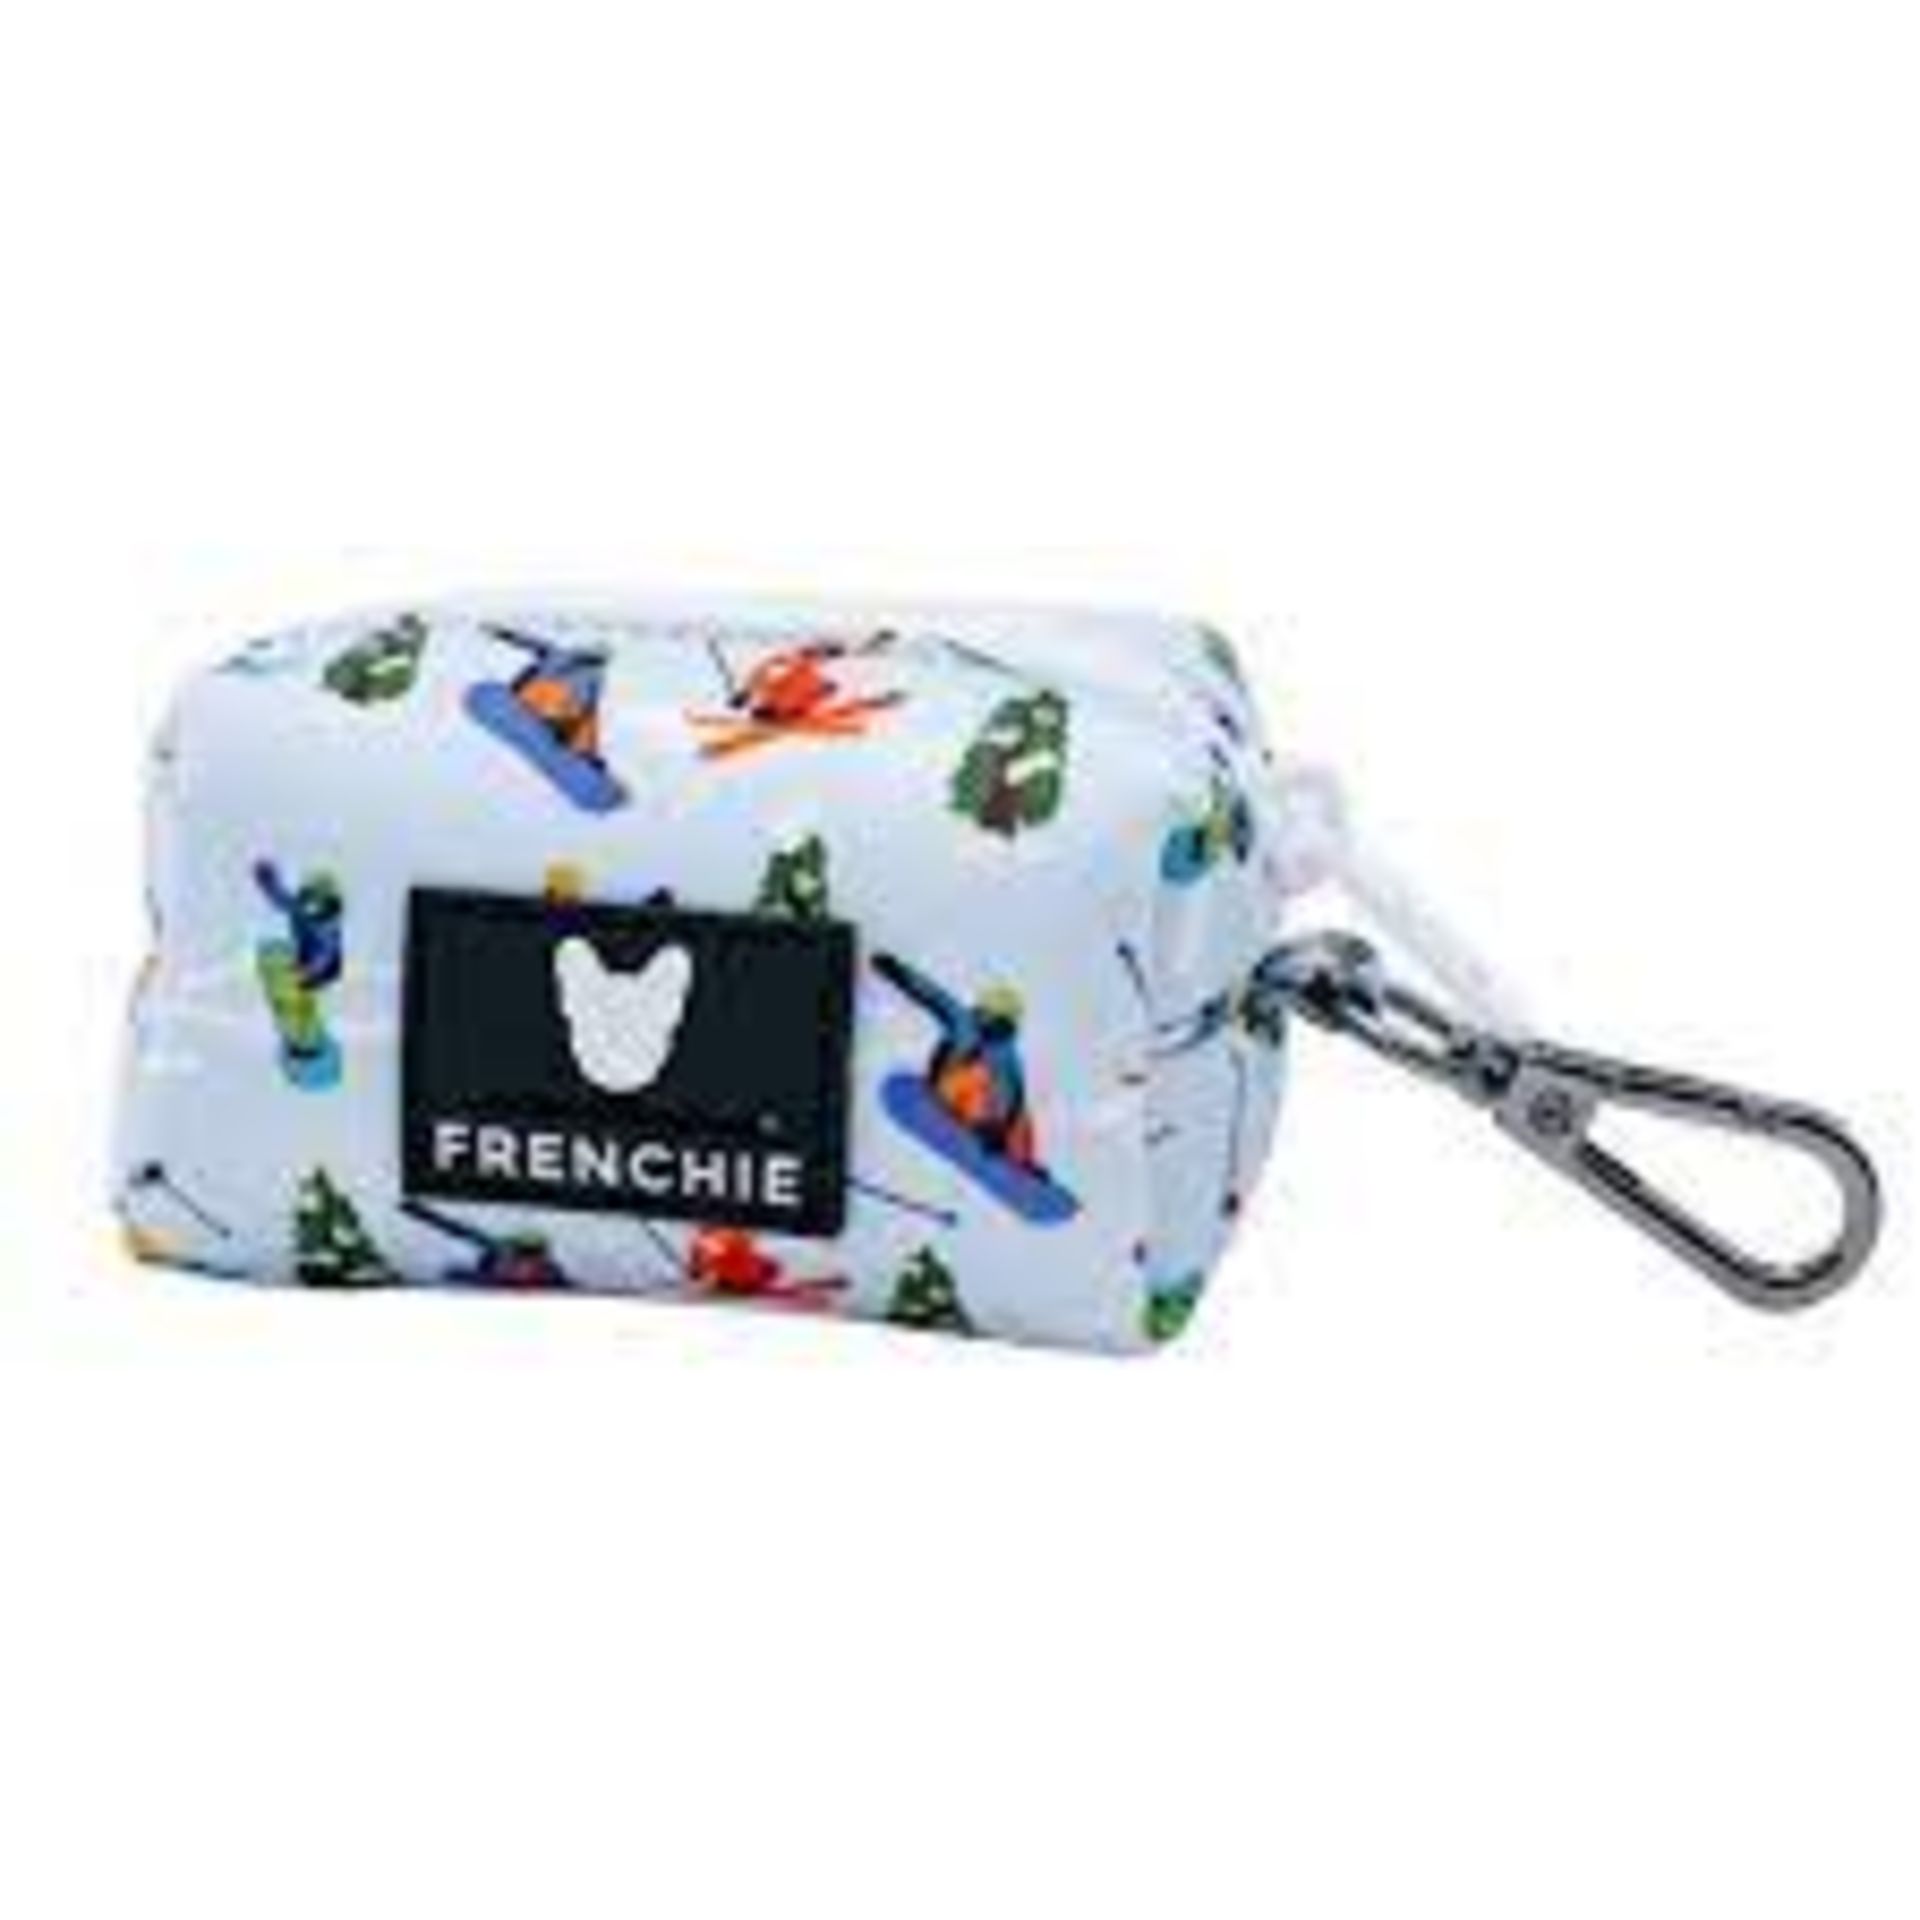 Trade Lot 100 X New .Packaged Frenchie The Bulldog Luxury Branded Dog Products. May include items - Image 15 of 50